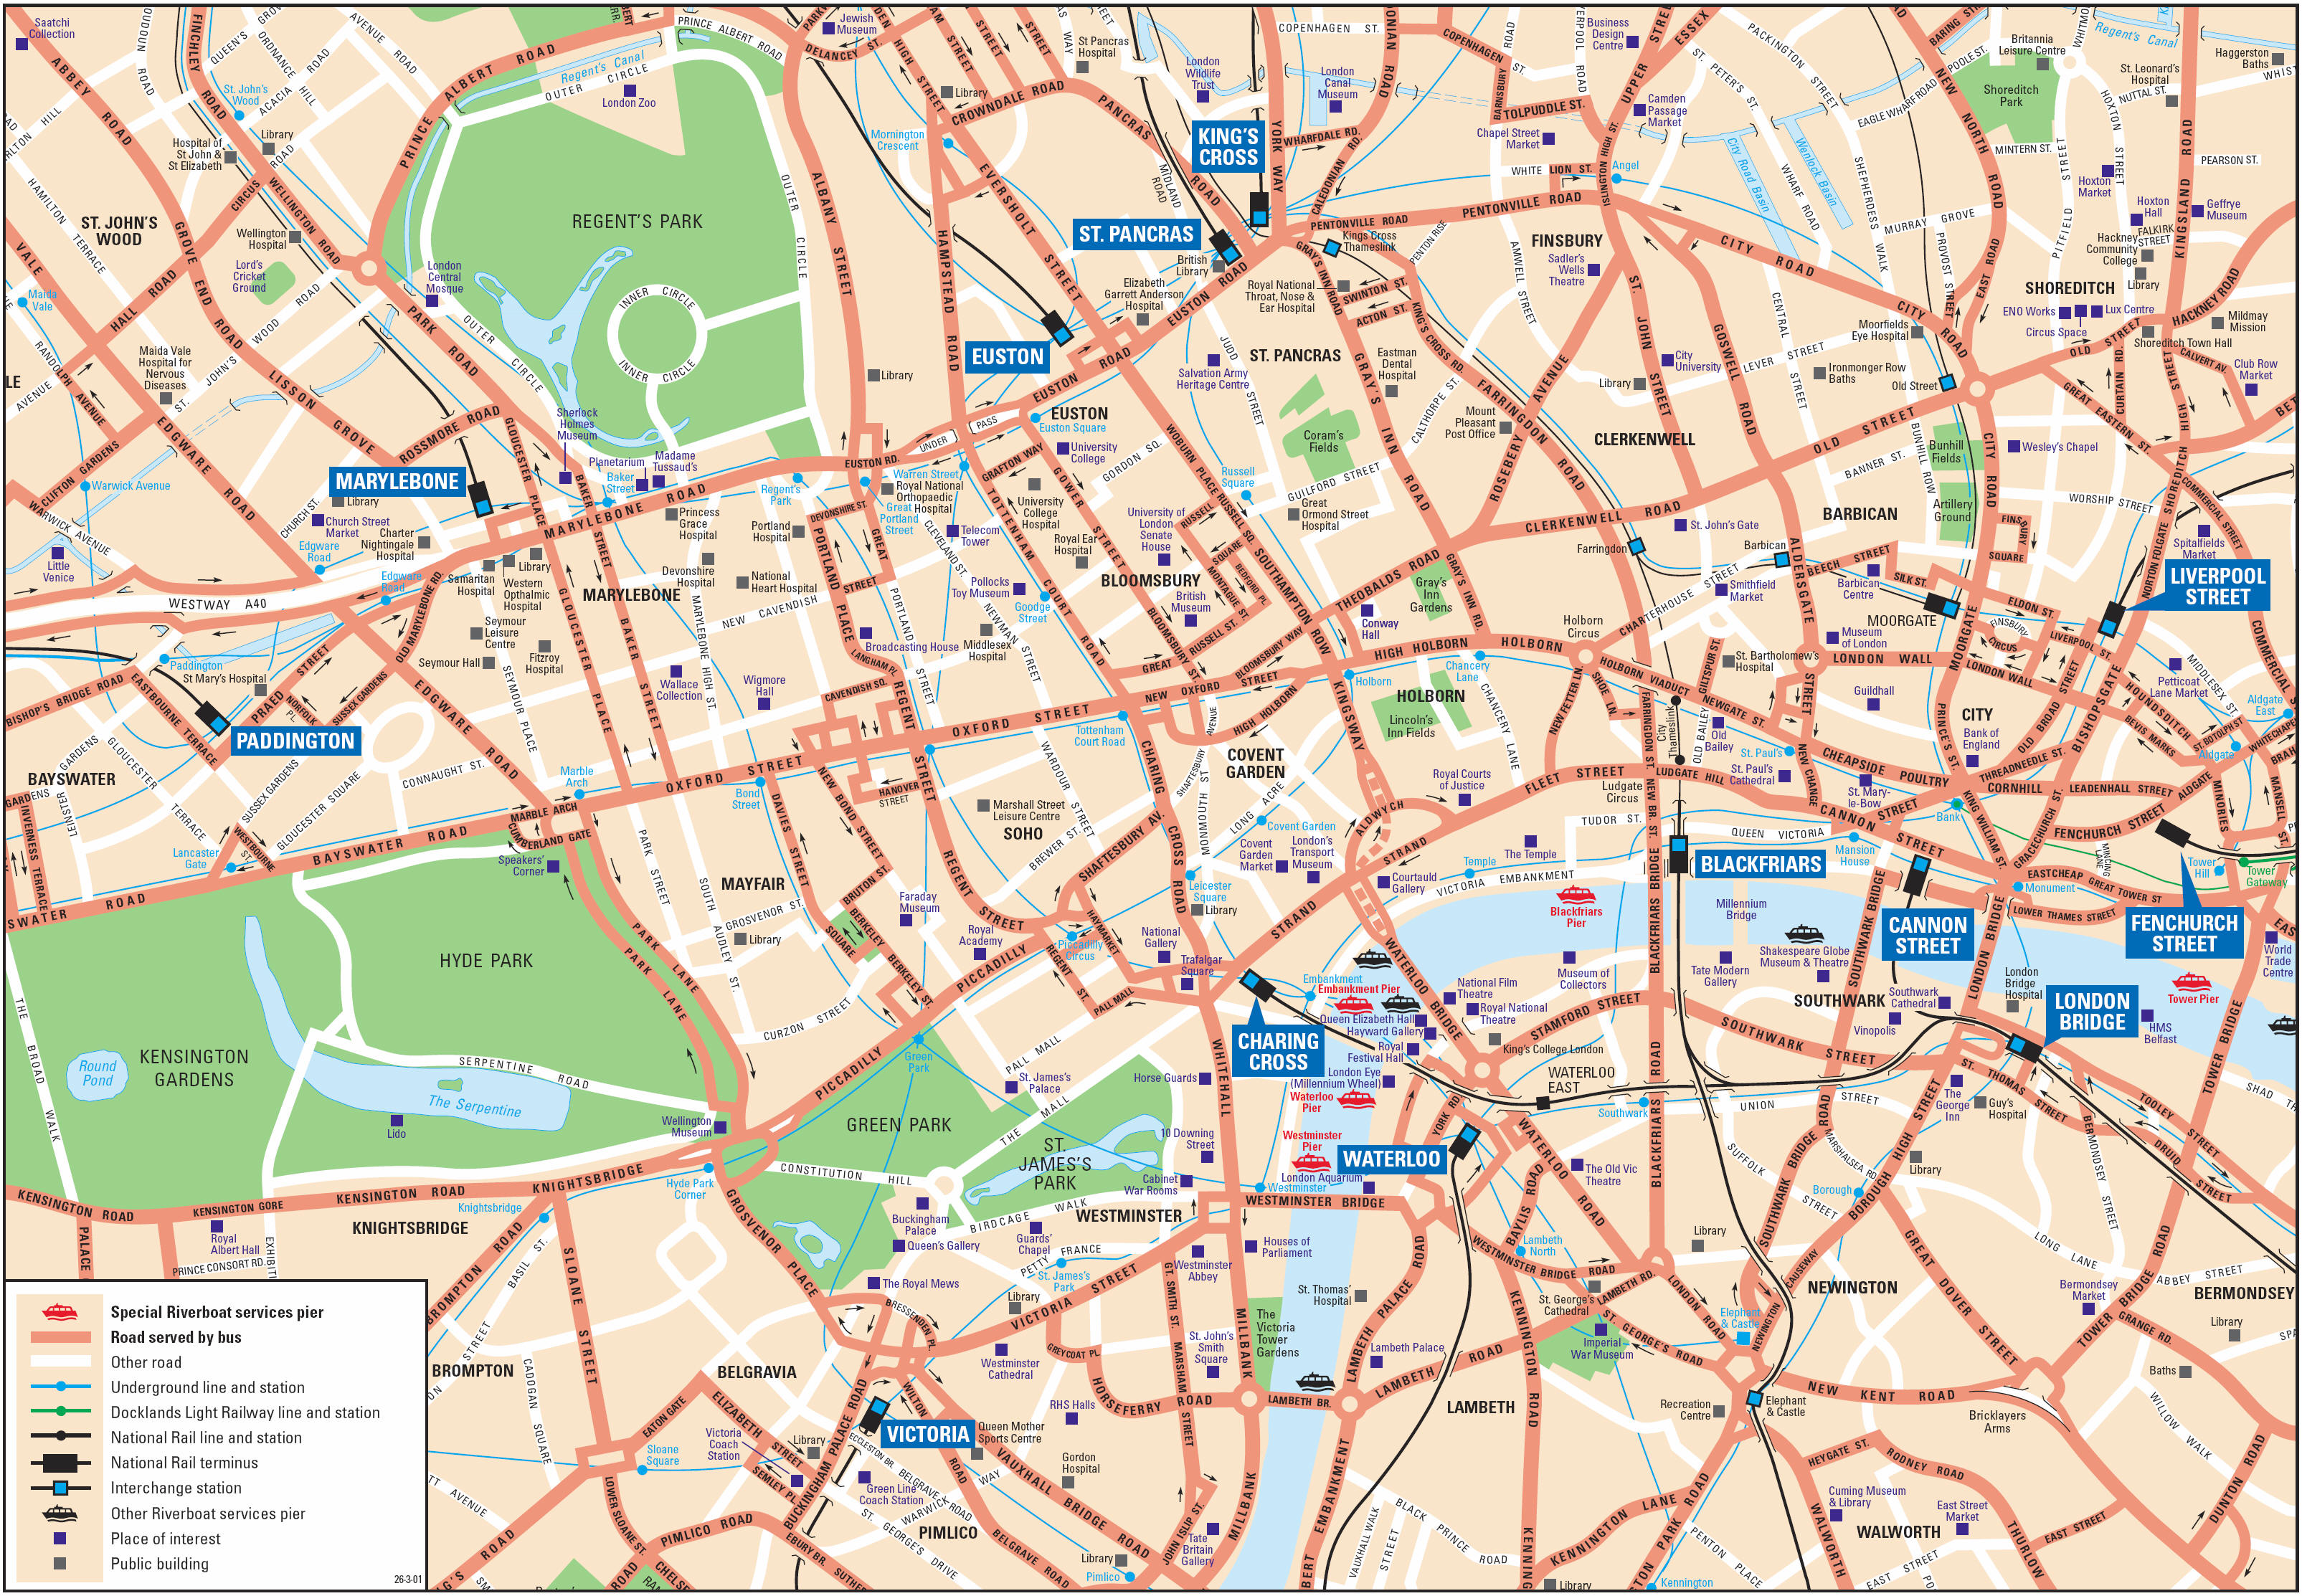 london-attractions-map-pdf-free-printable-tourist-map-london-waking